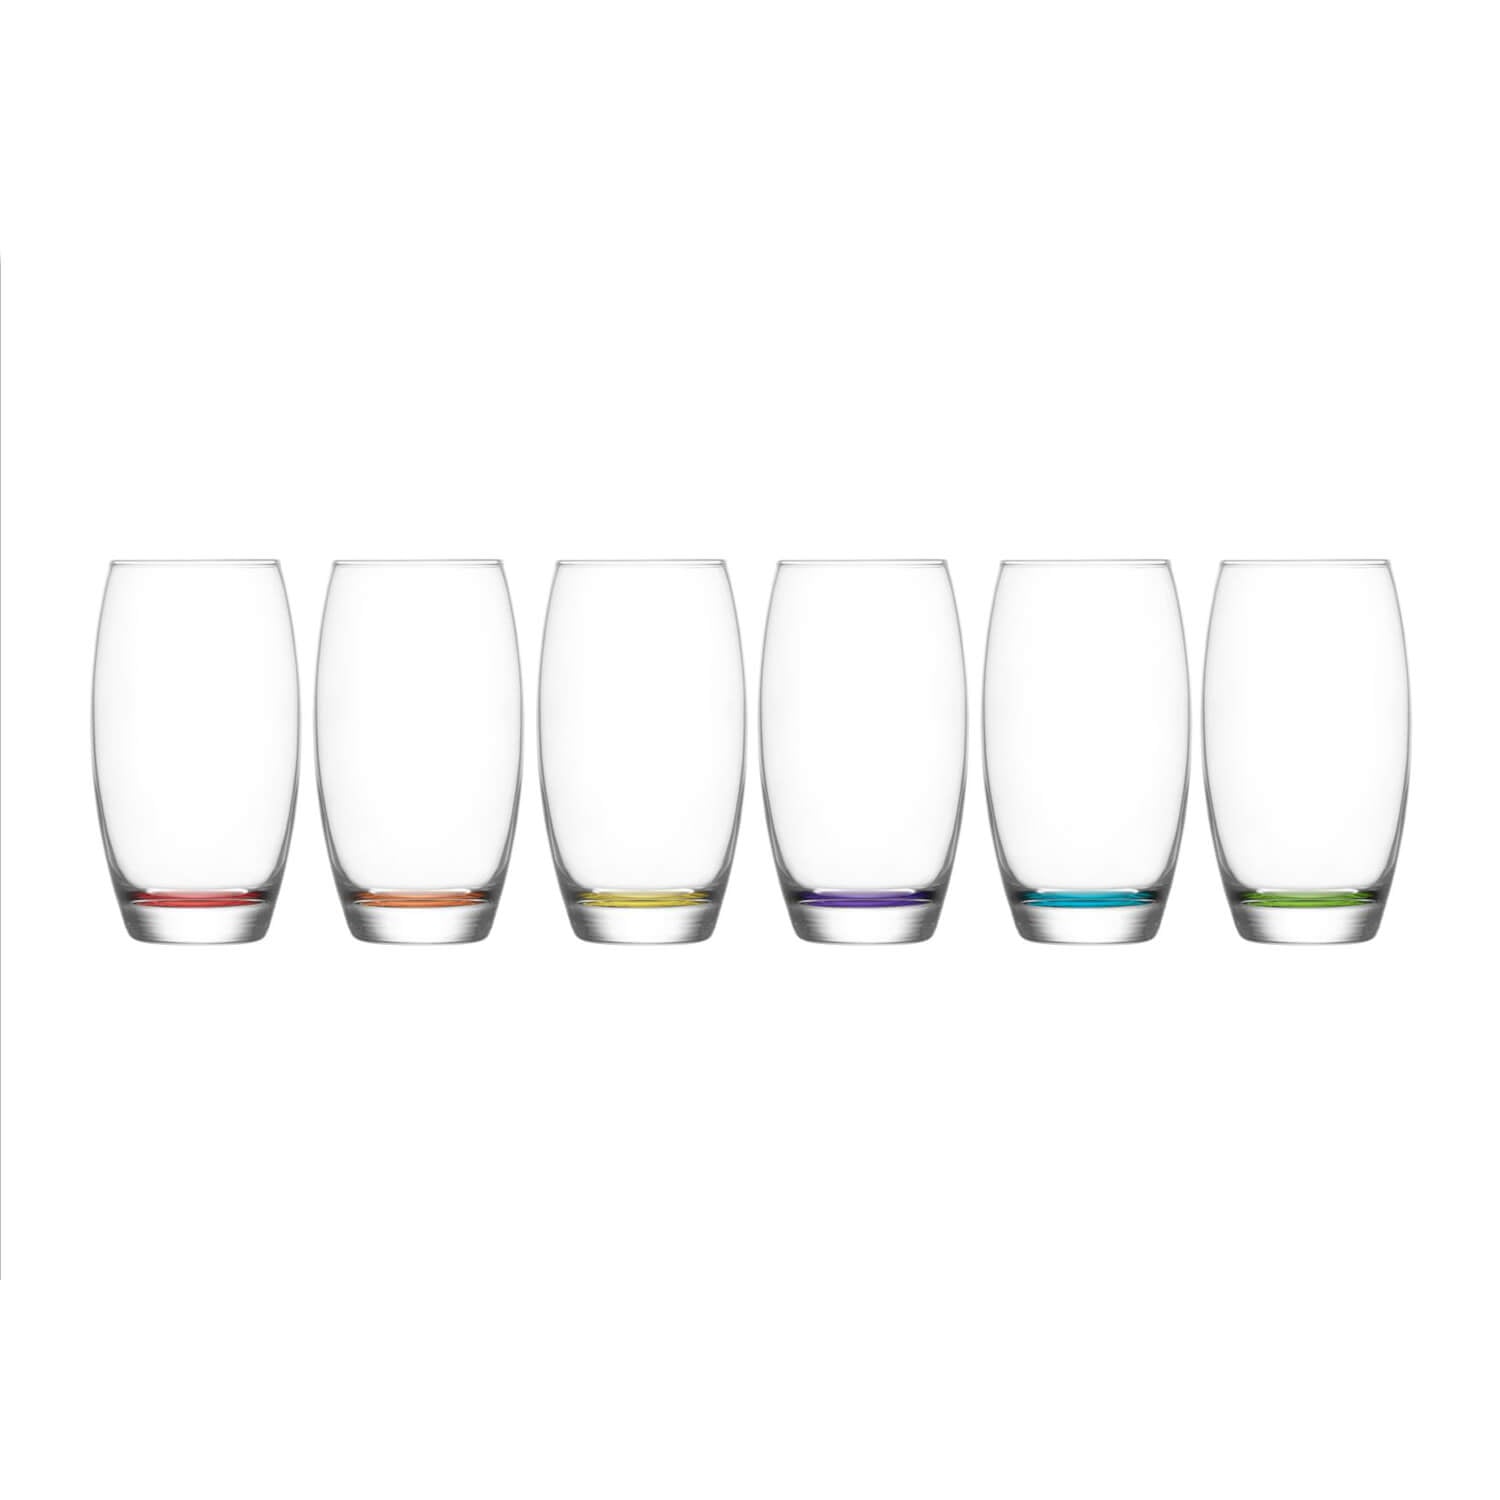 Killarney Crystal Jewel Collection - Set of 6 Highball Glasses 1 Shaws Department Stores